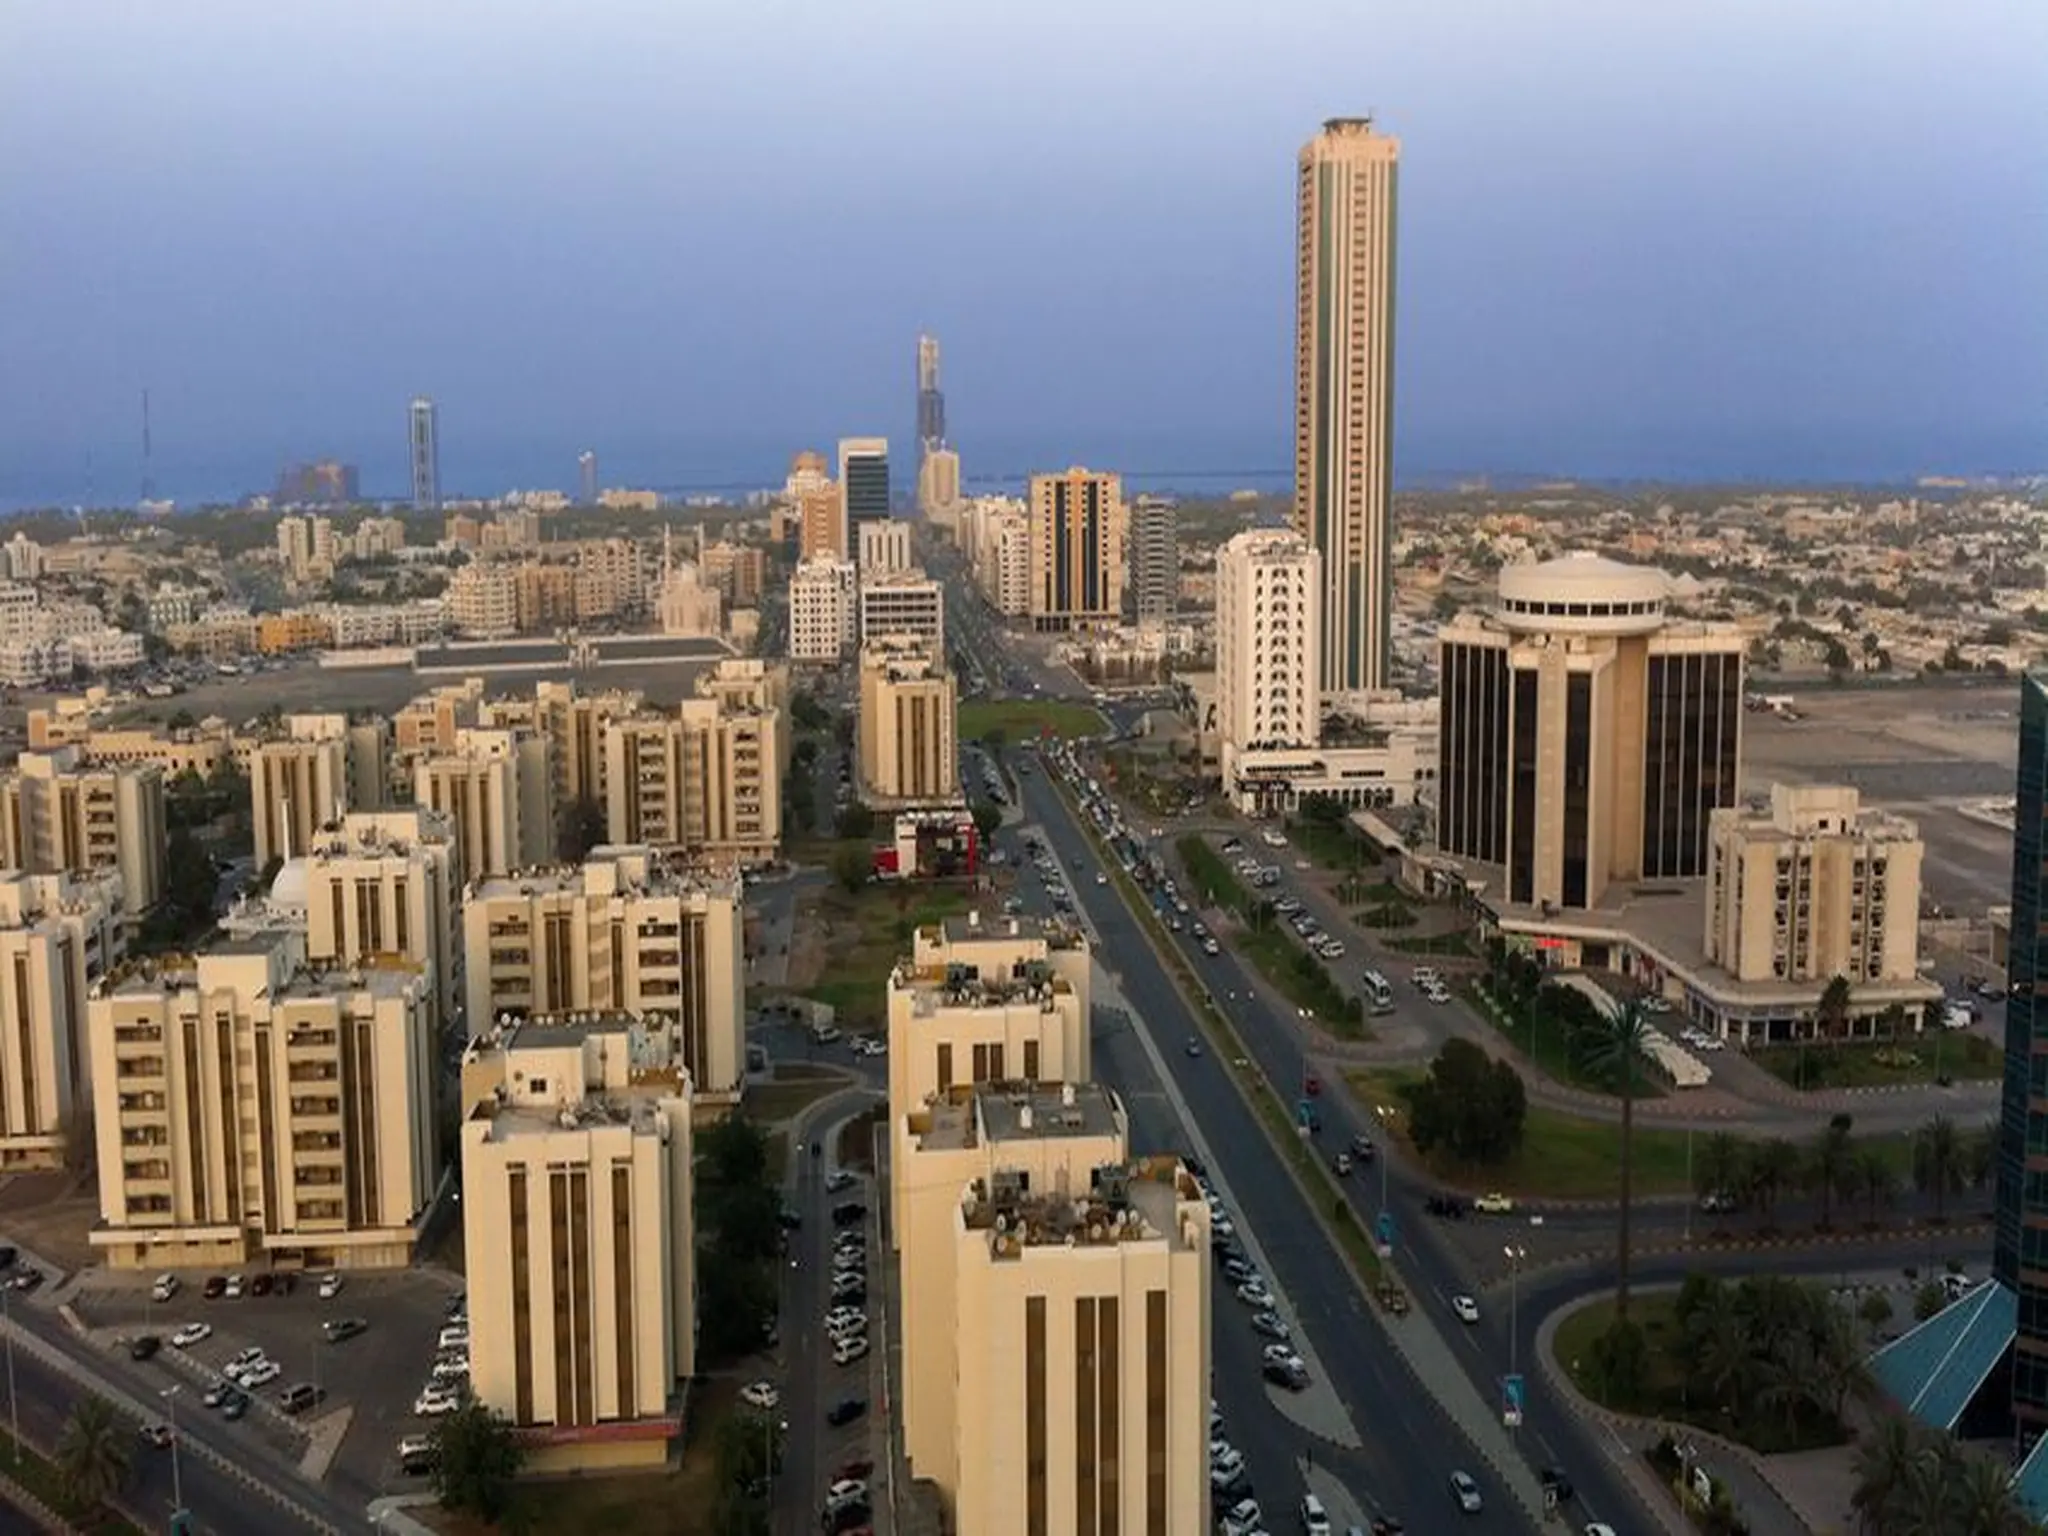 Now.. a list of the cheapest places to live in Fujairah